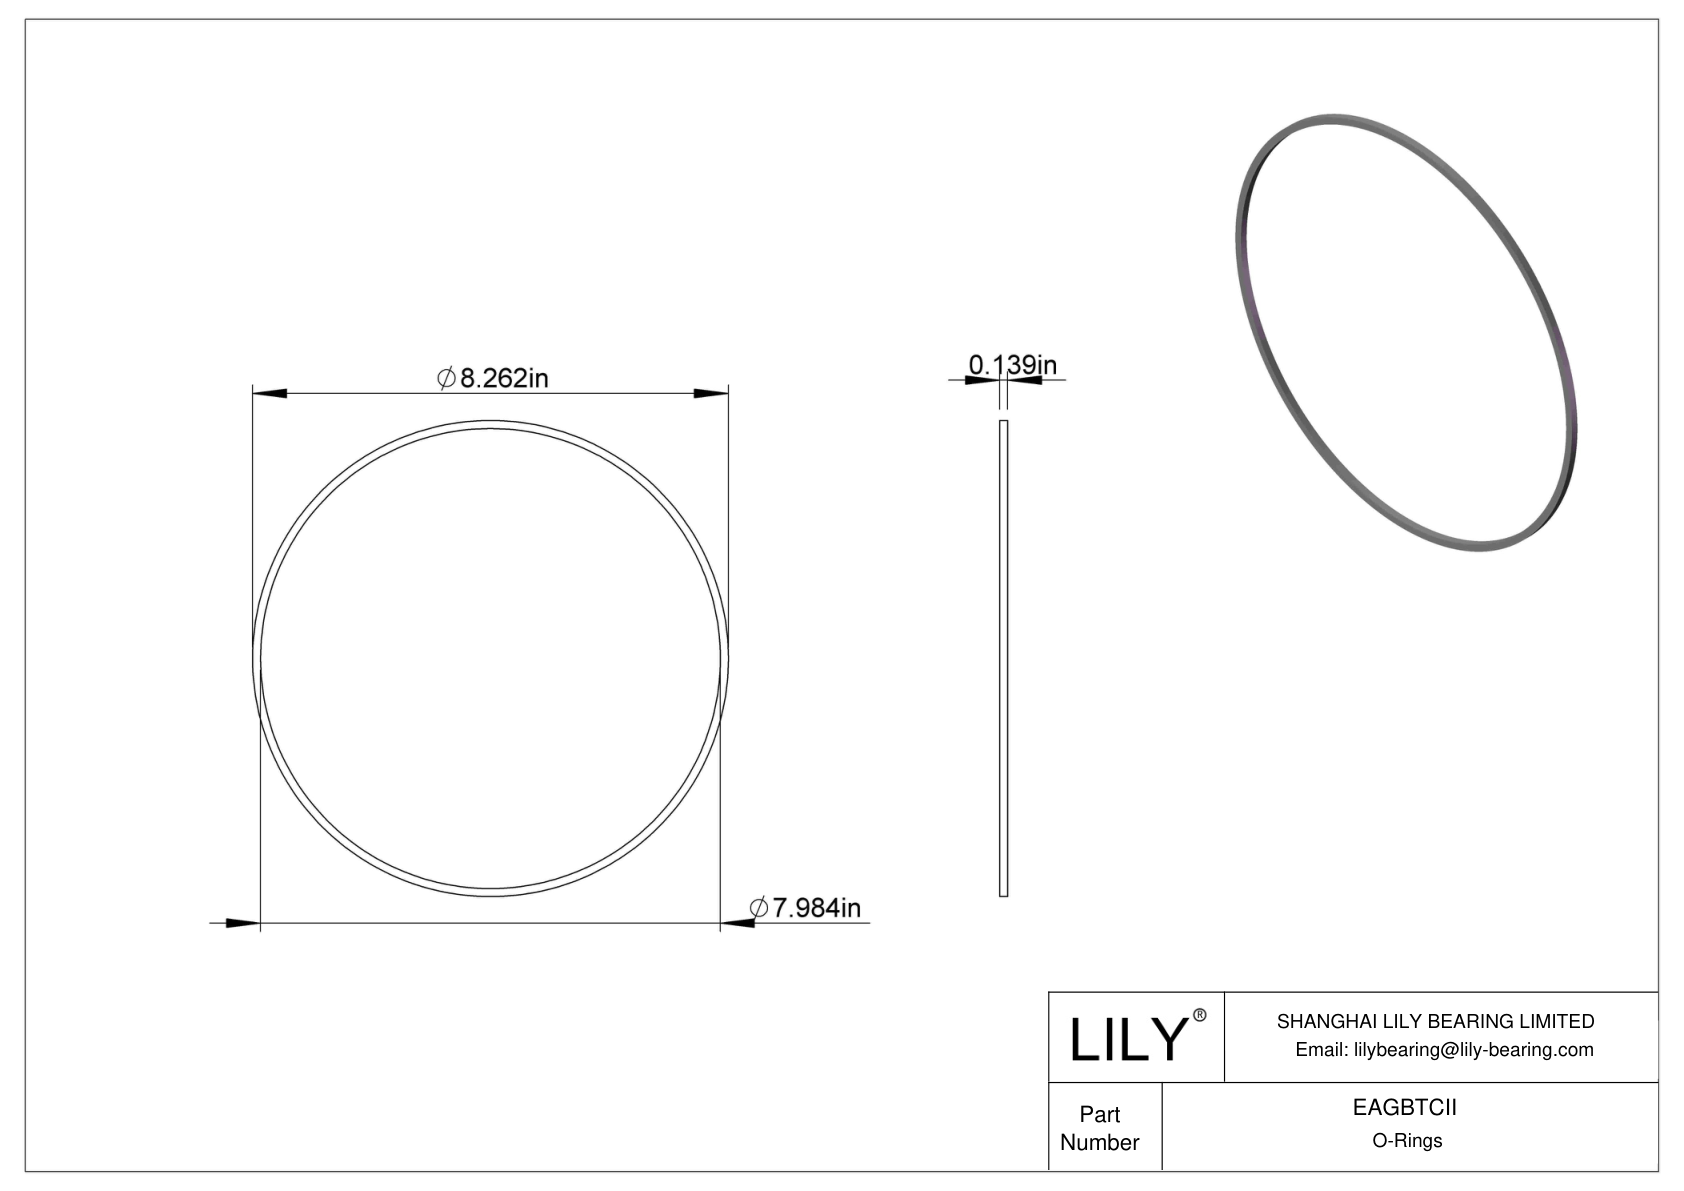 EAGBTCII Oil Resistant O-Rings Square cad drawing